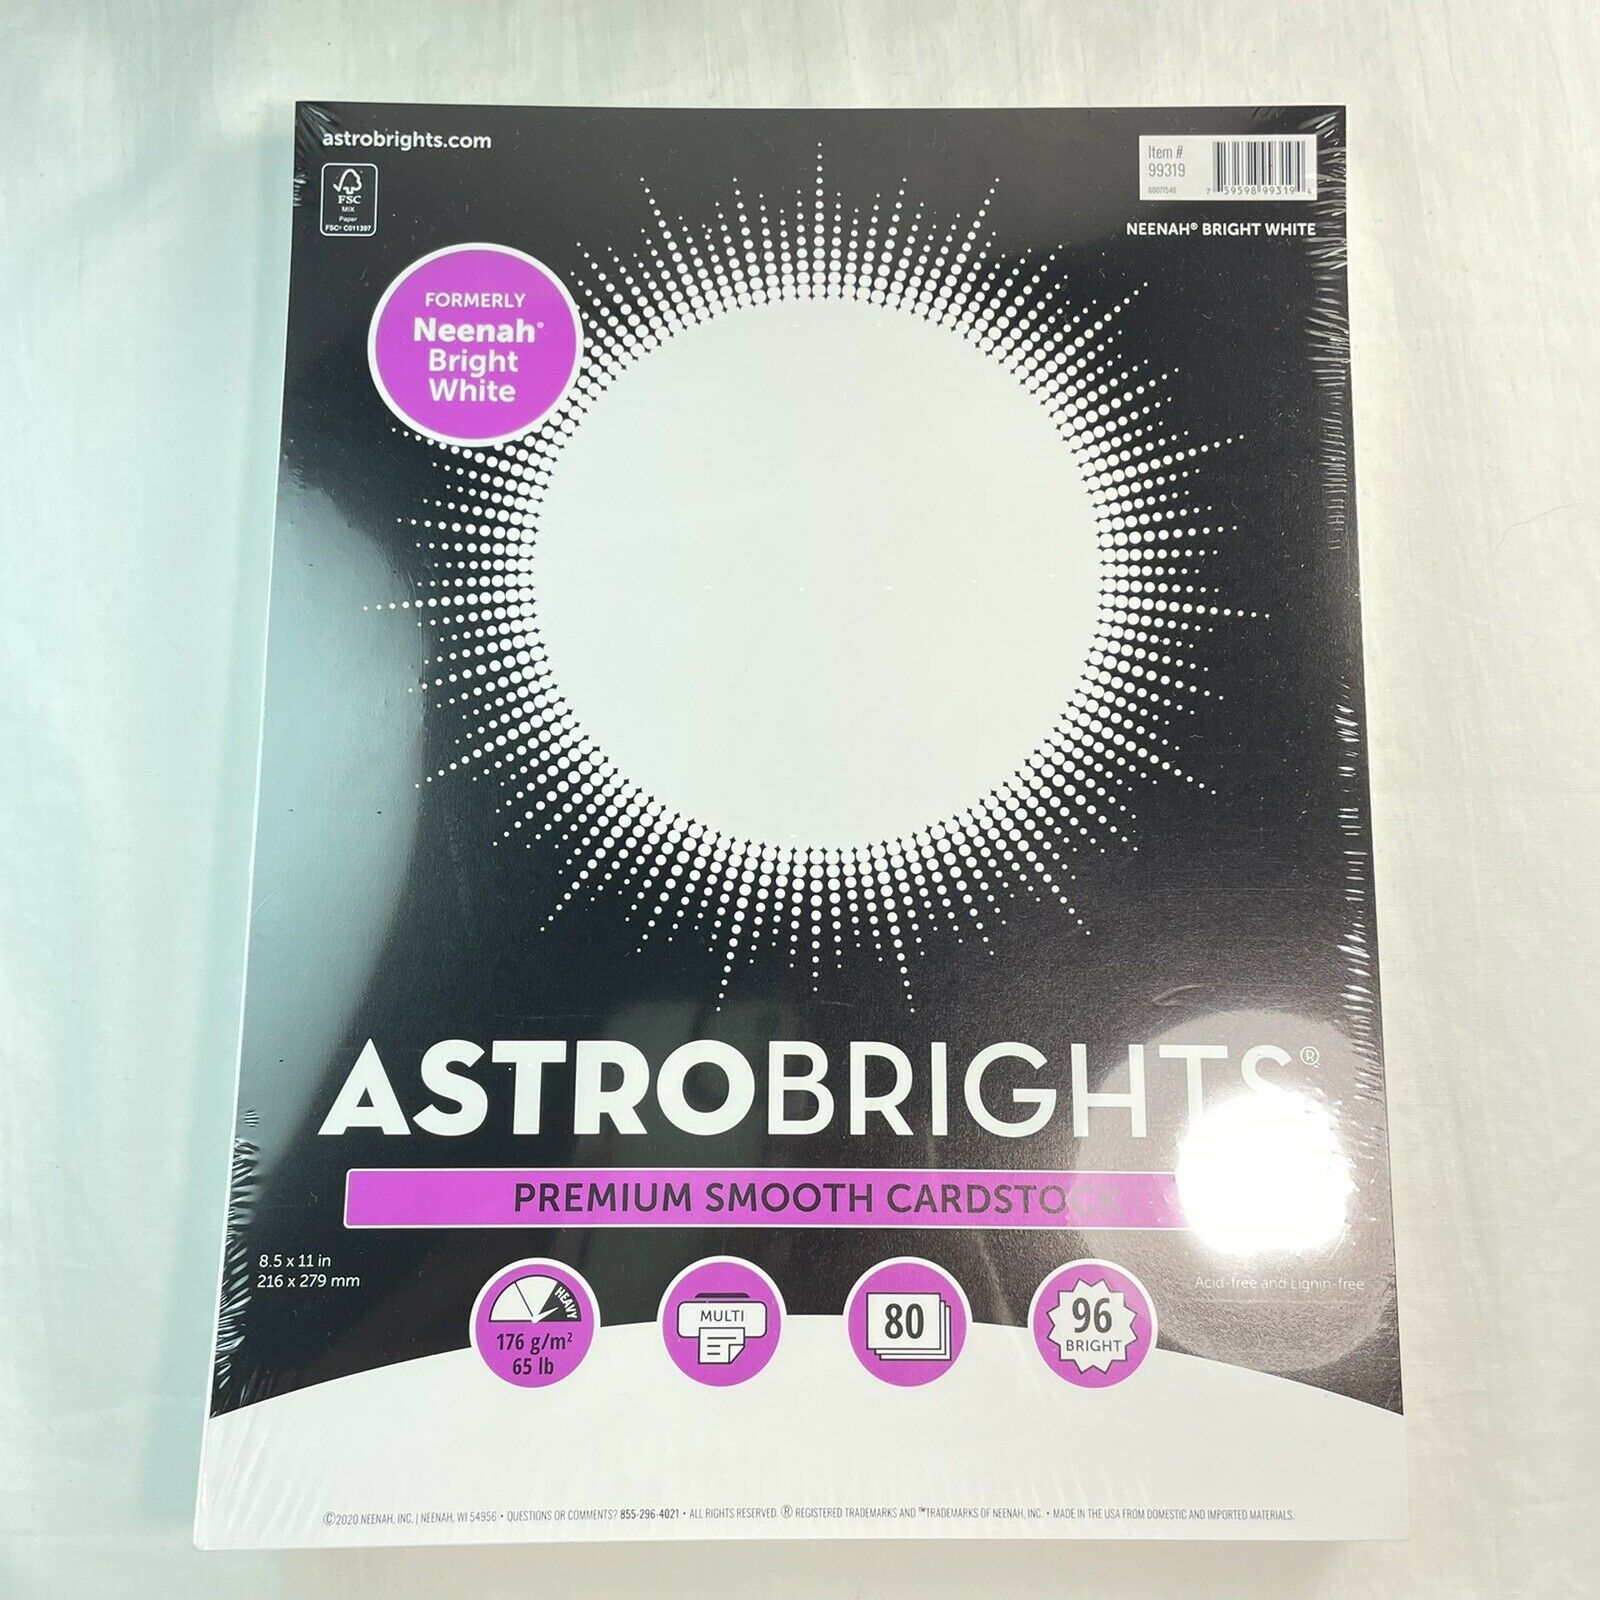 Astrobrights Neenah Bright White Cardstock, 8.5" X 11", 65 Lb 176 Gsm, White, 80